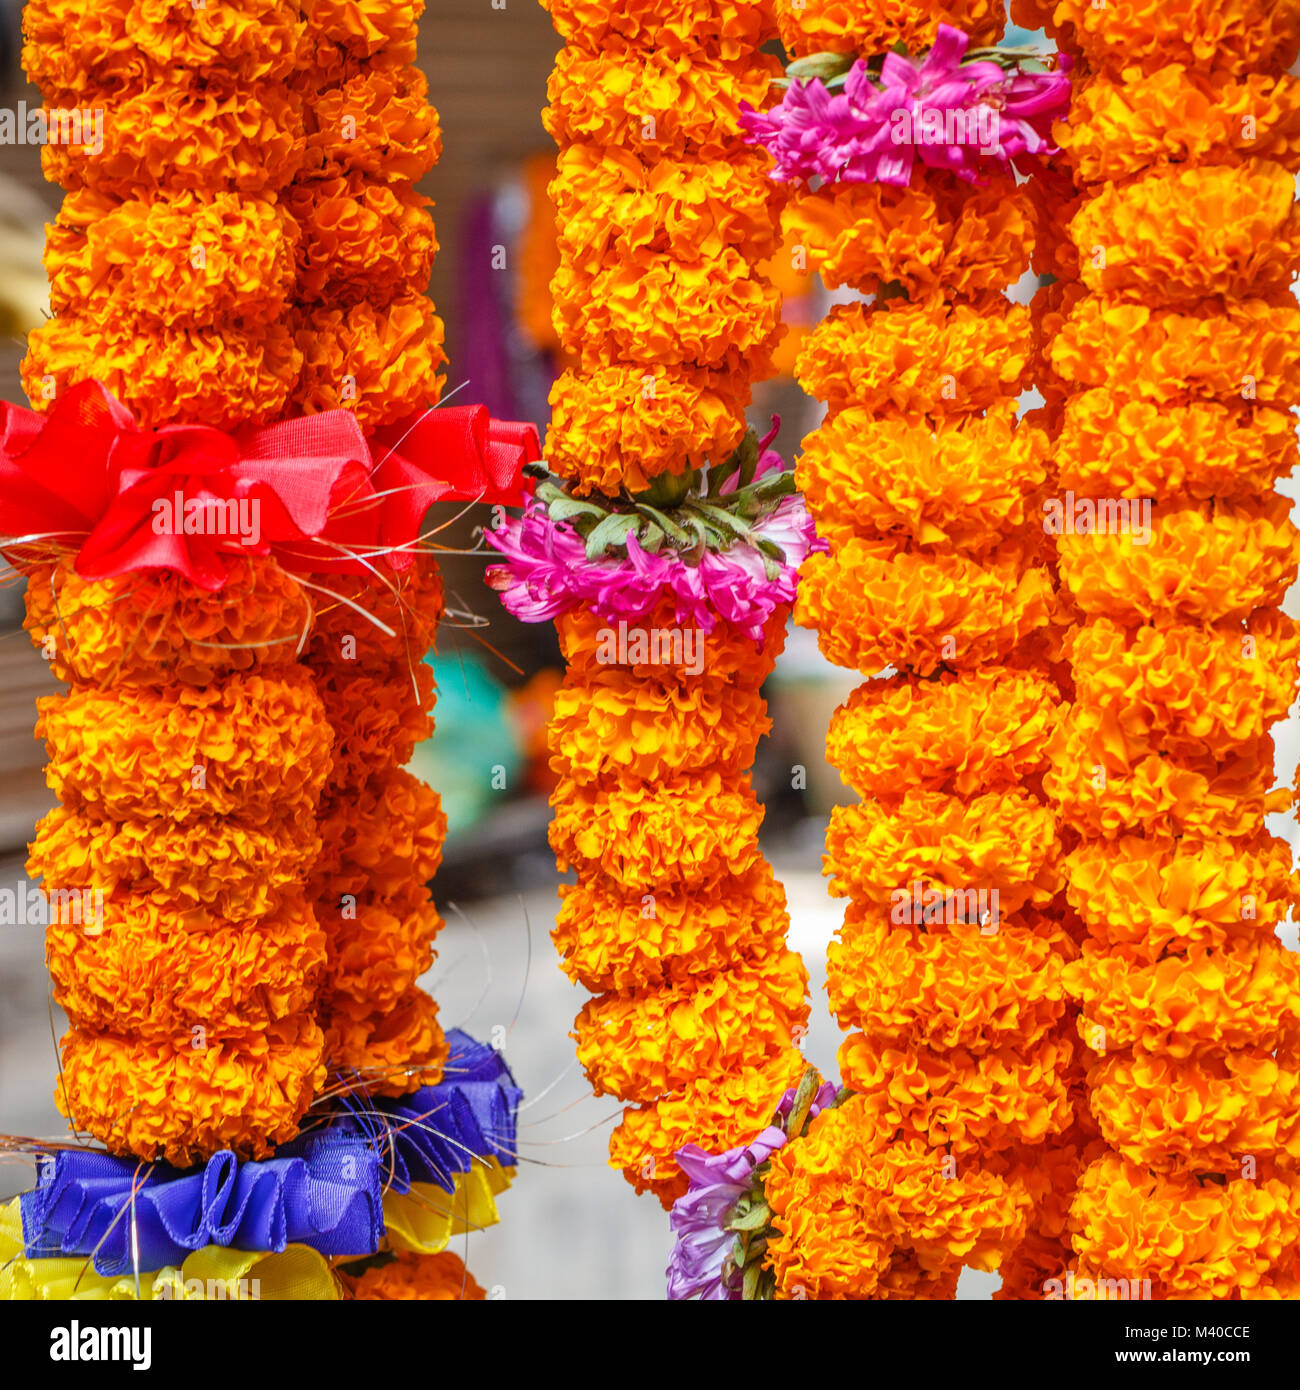 Mala, traditional Nepalese flower garlands made with Tagetes (Marigold) sold in the markets for daily worships and rituals, Nepal. Square image. Stock Photo